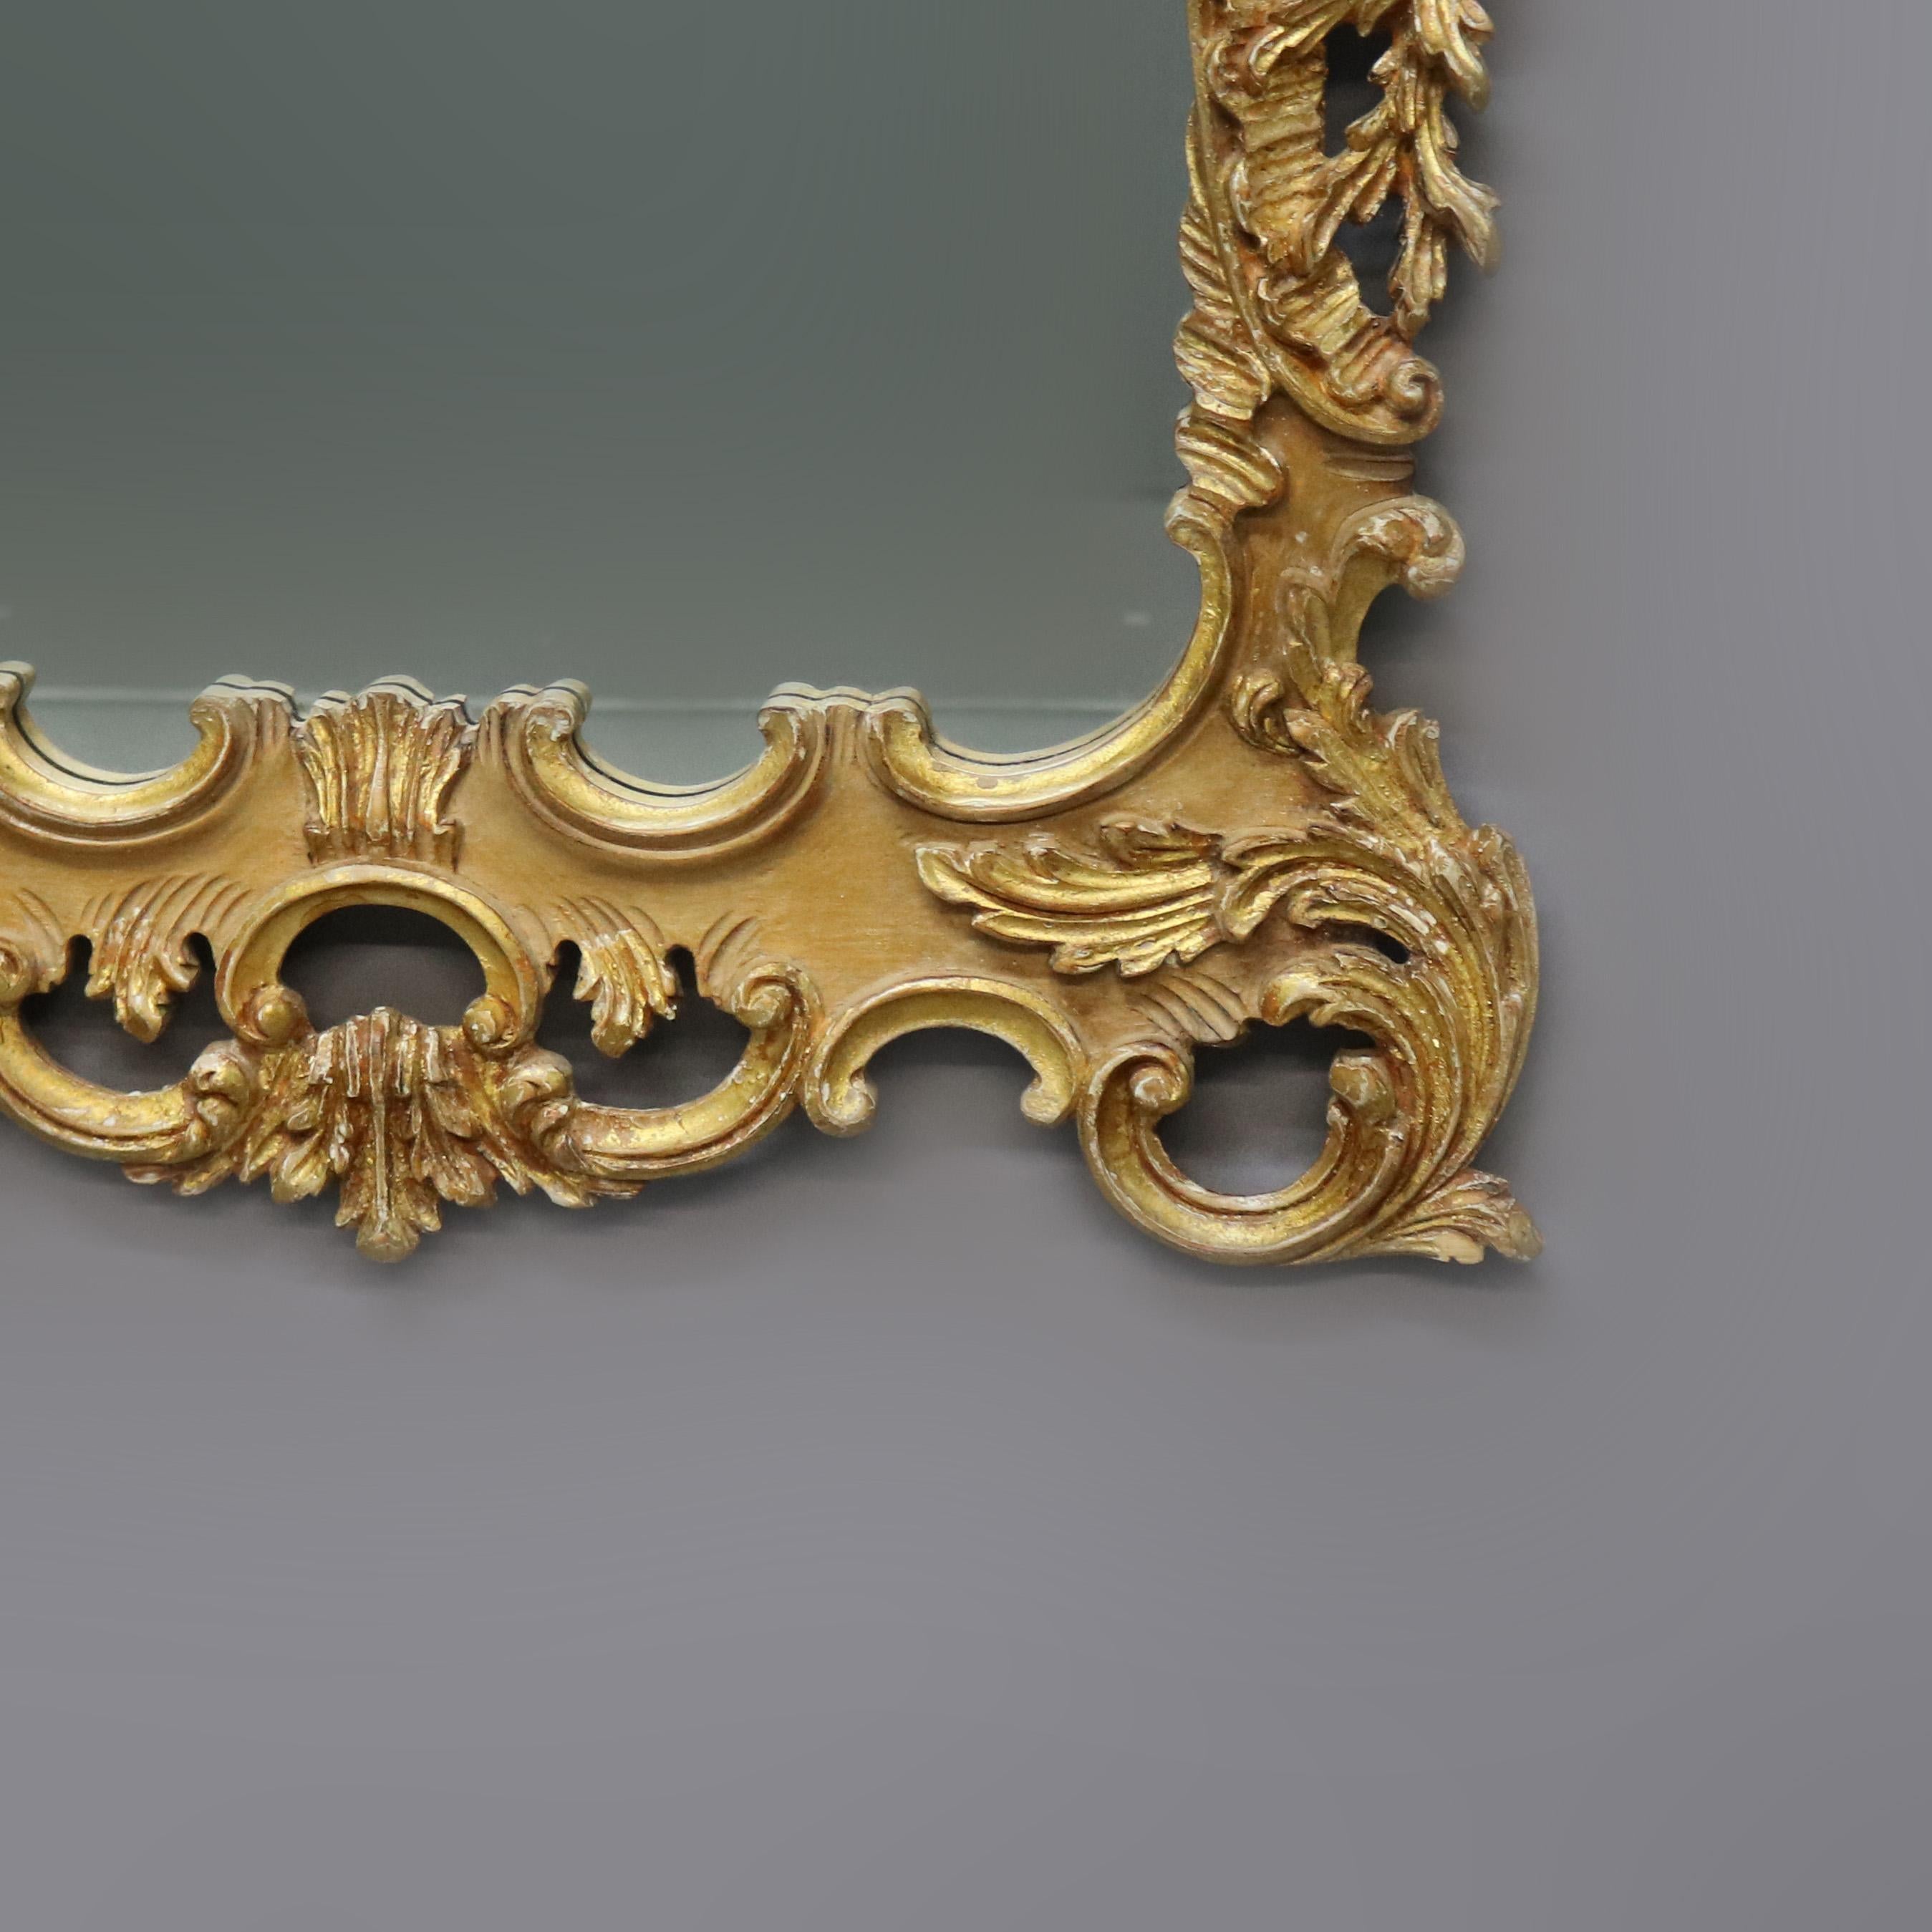 Antique Oversized Italian Rococo Revival Giltwood Over Mantel Wall Mirror 20th C 3